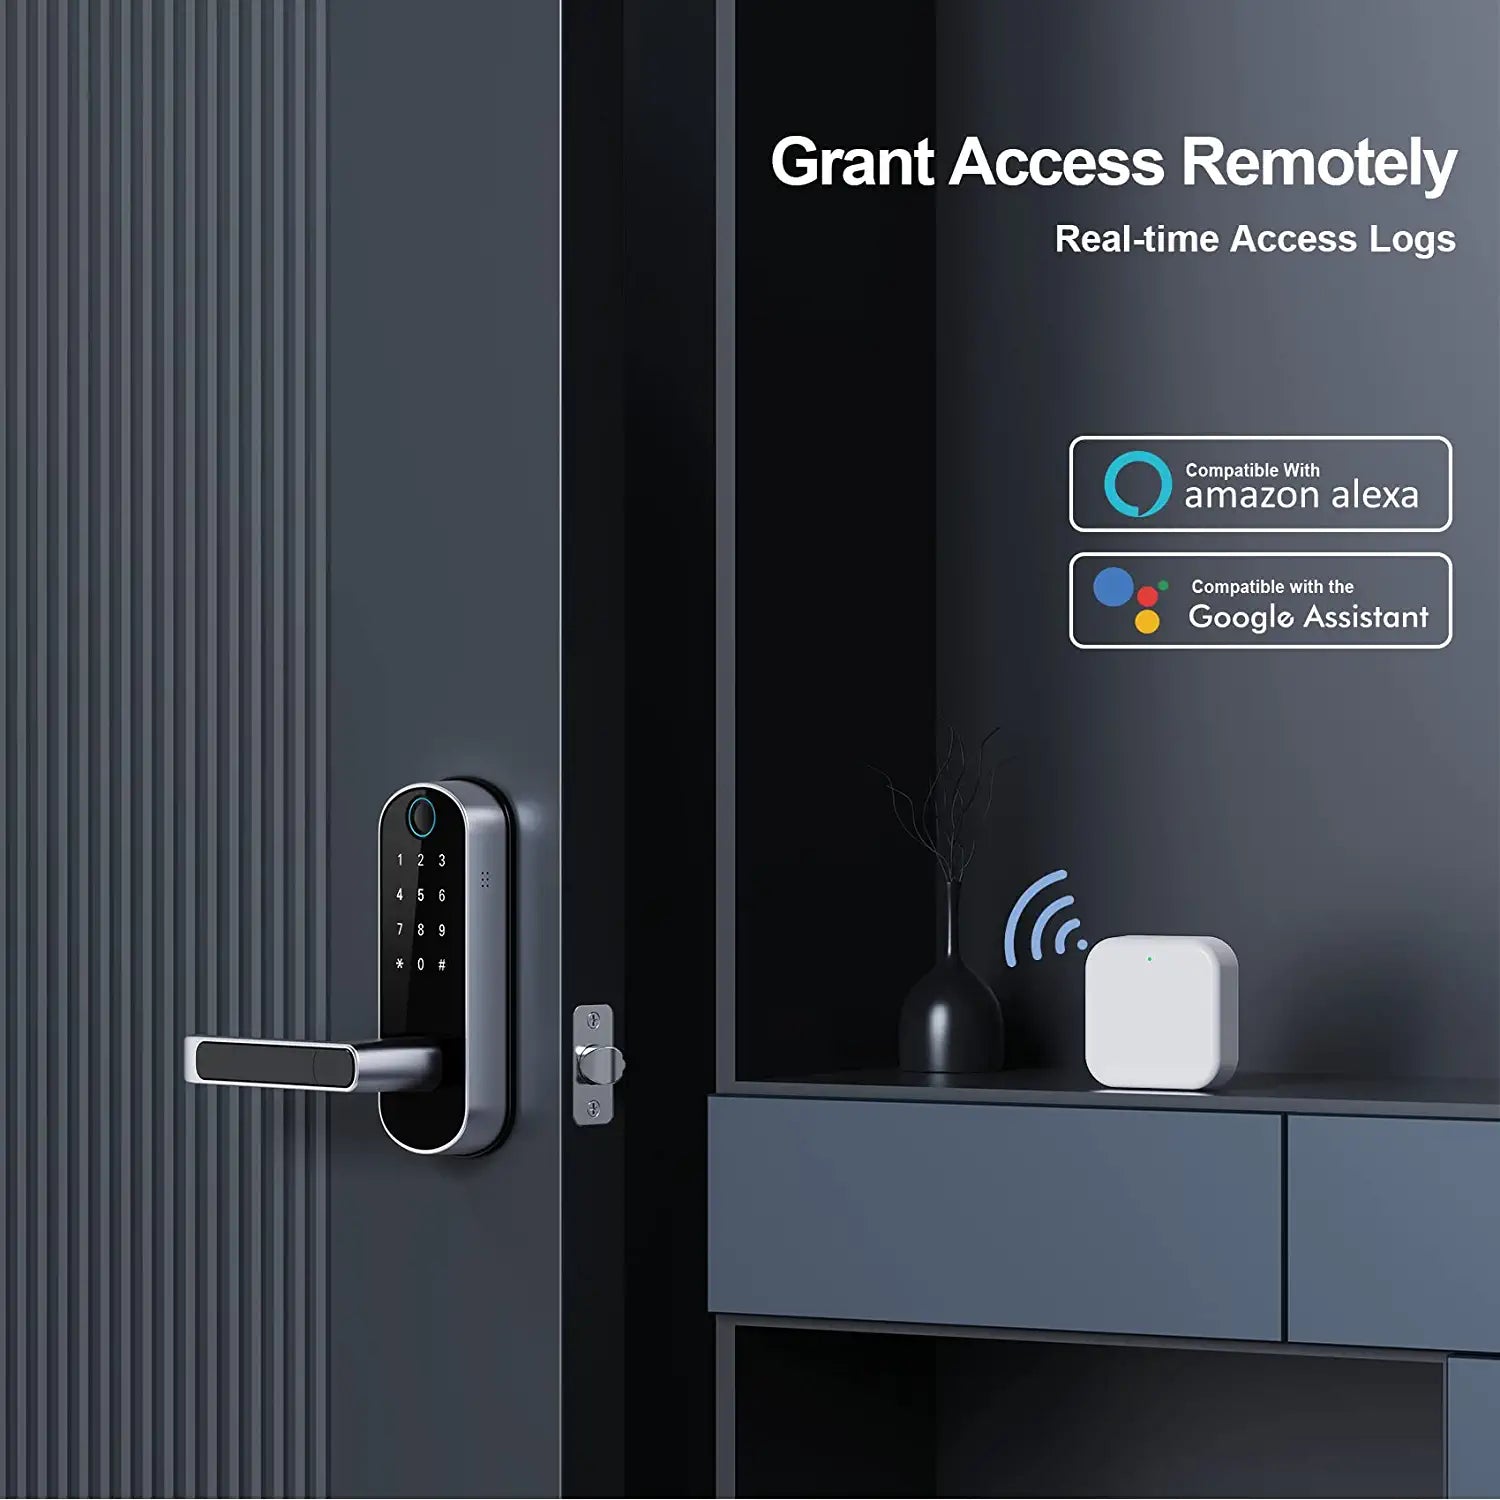 Grant_access_remotely